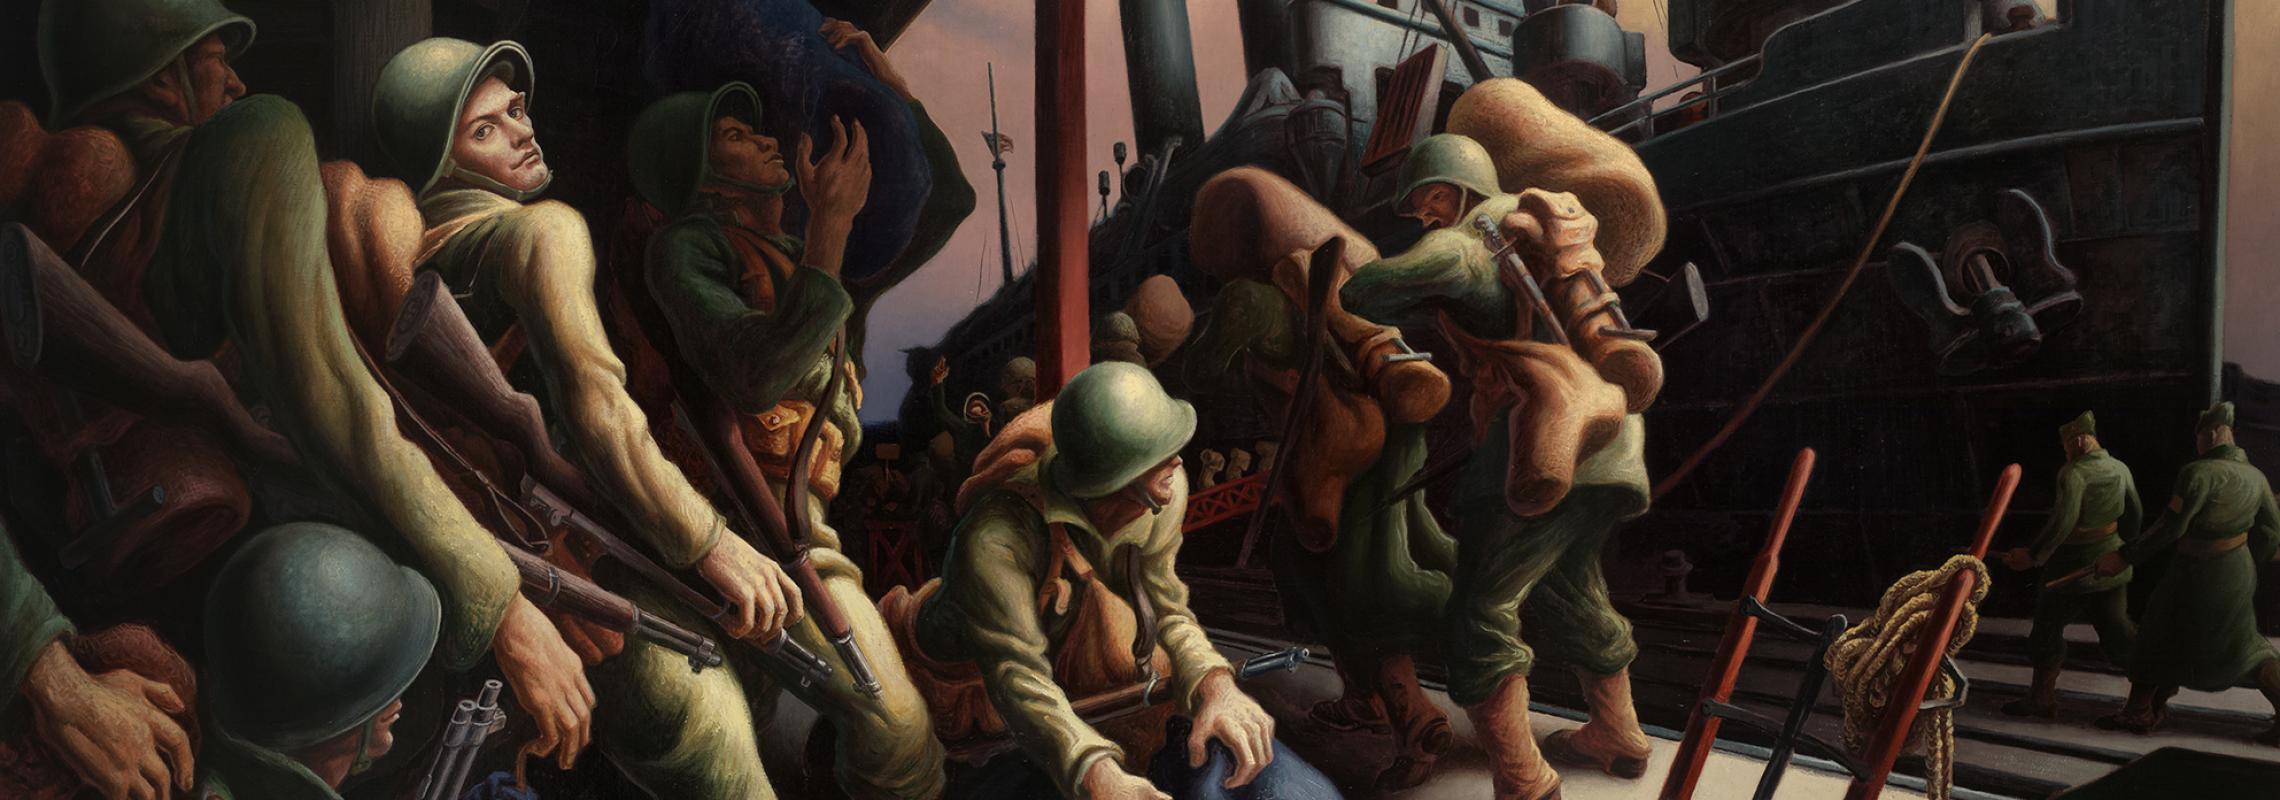 Painting of soldiers preparing to board a ship to go to war. One soldier looks over his shoulder back at the viewer